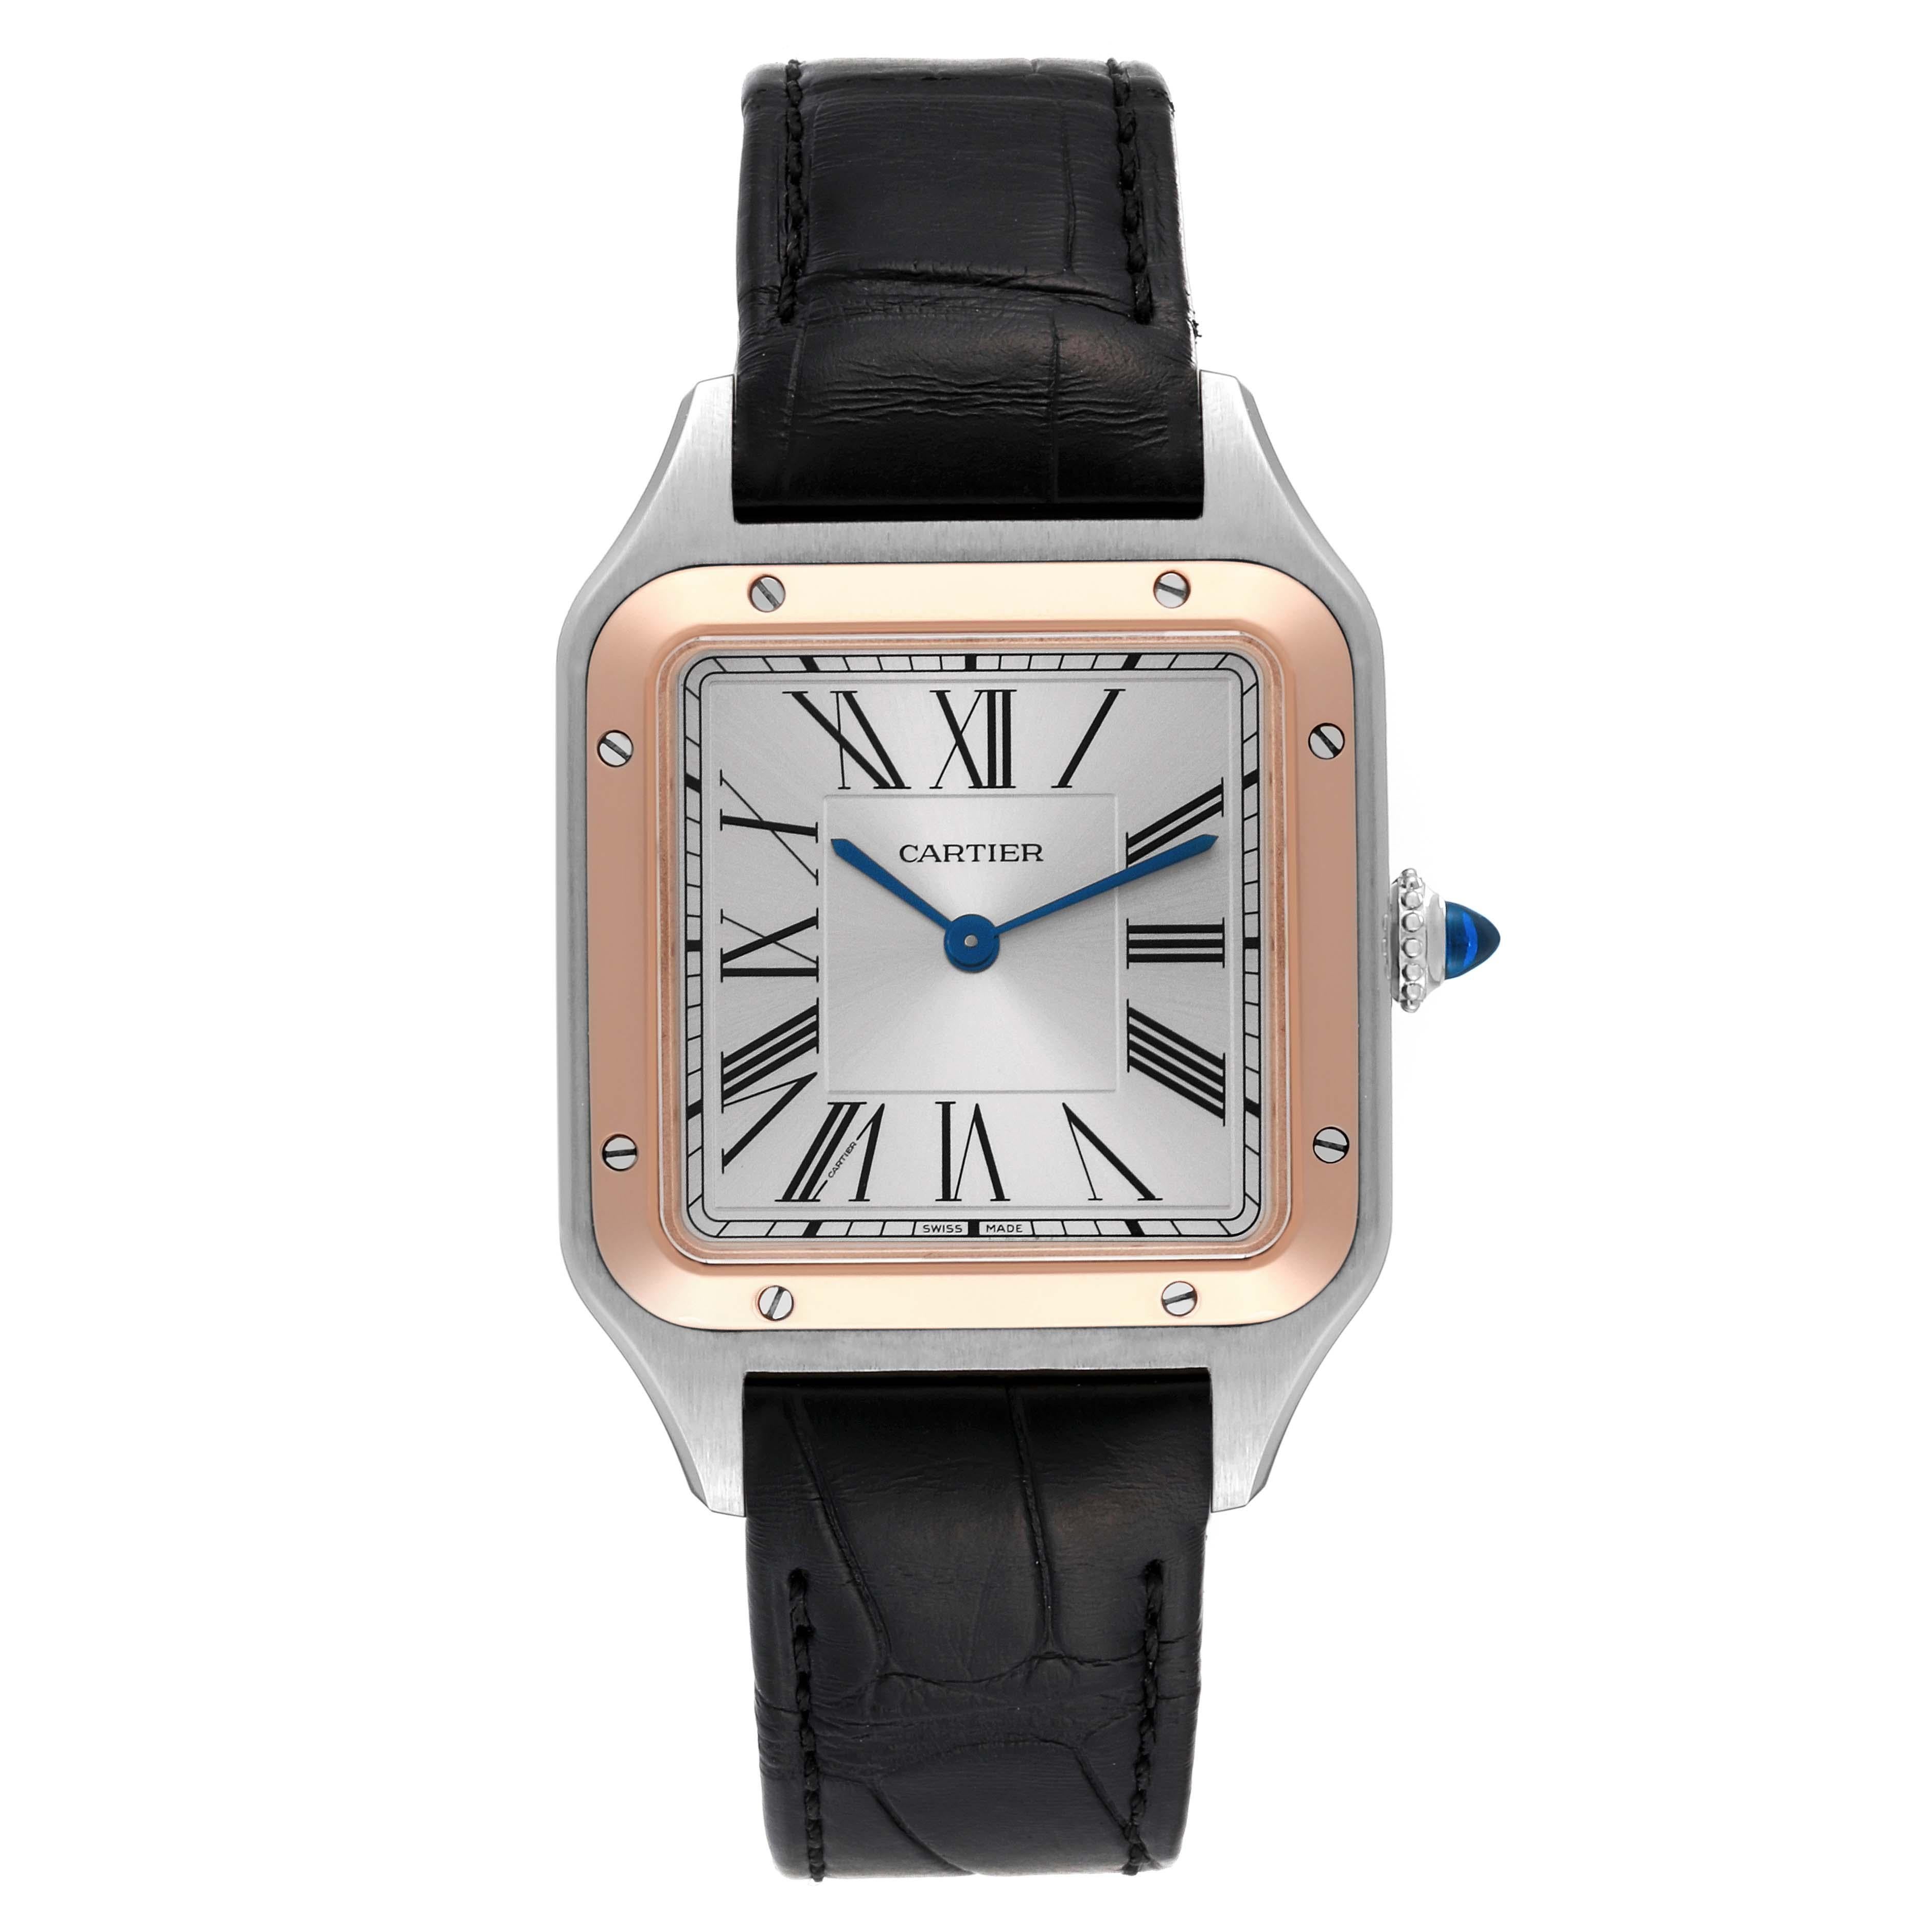 Cartier Santos Dumont Large Steel Rose Gold Mens Watch W2SA0011. Quartz movement. Stainless steel case 43.5 mm x 31.4 mm. Case thickness 7.3 mm. Circular grained crown set with blue spinel cabochon. . Scratch resistant sapphire crystal.